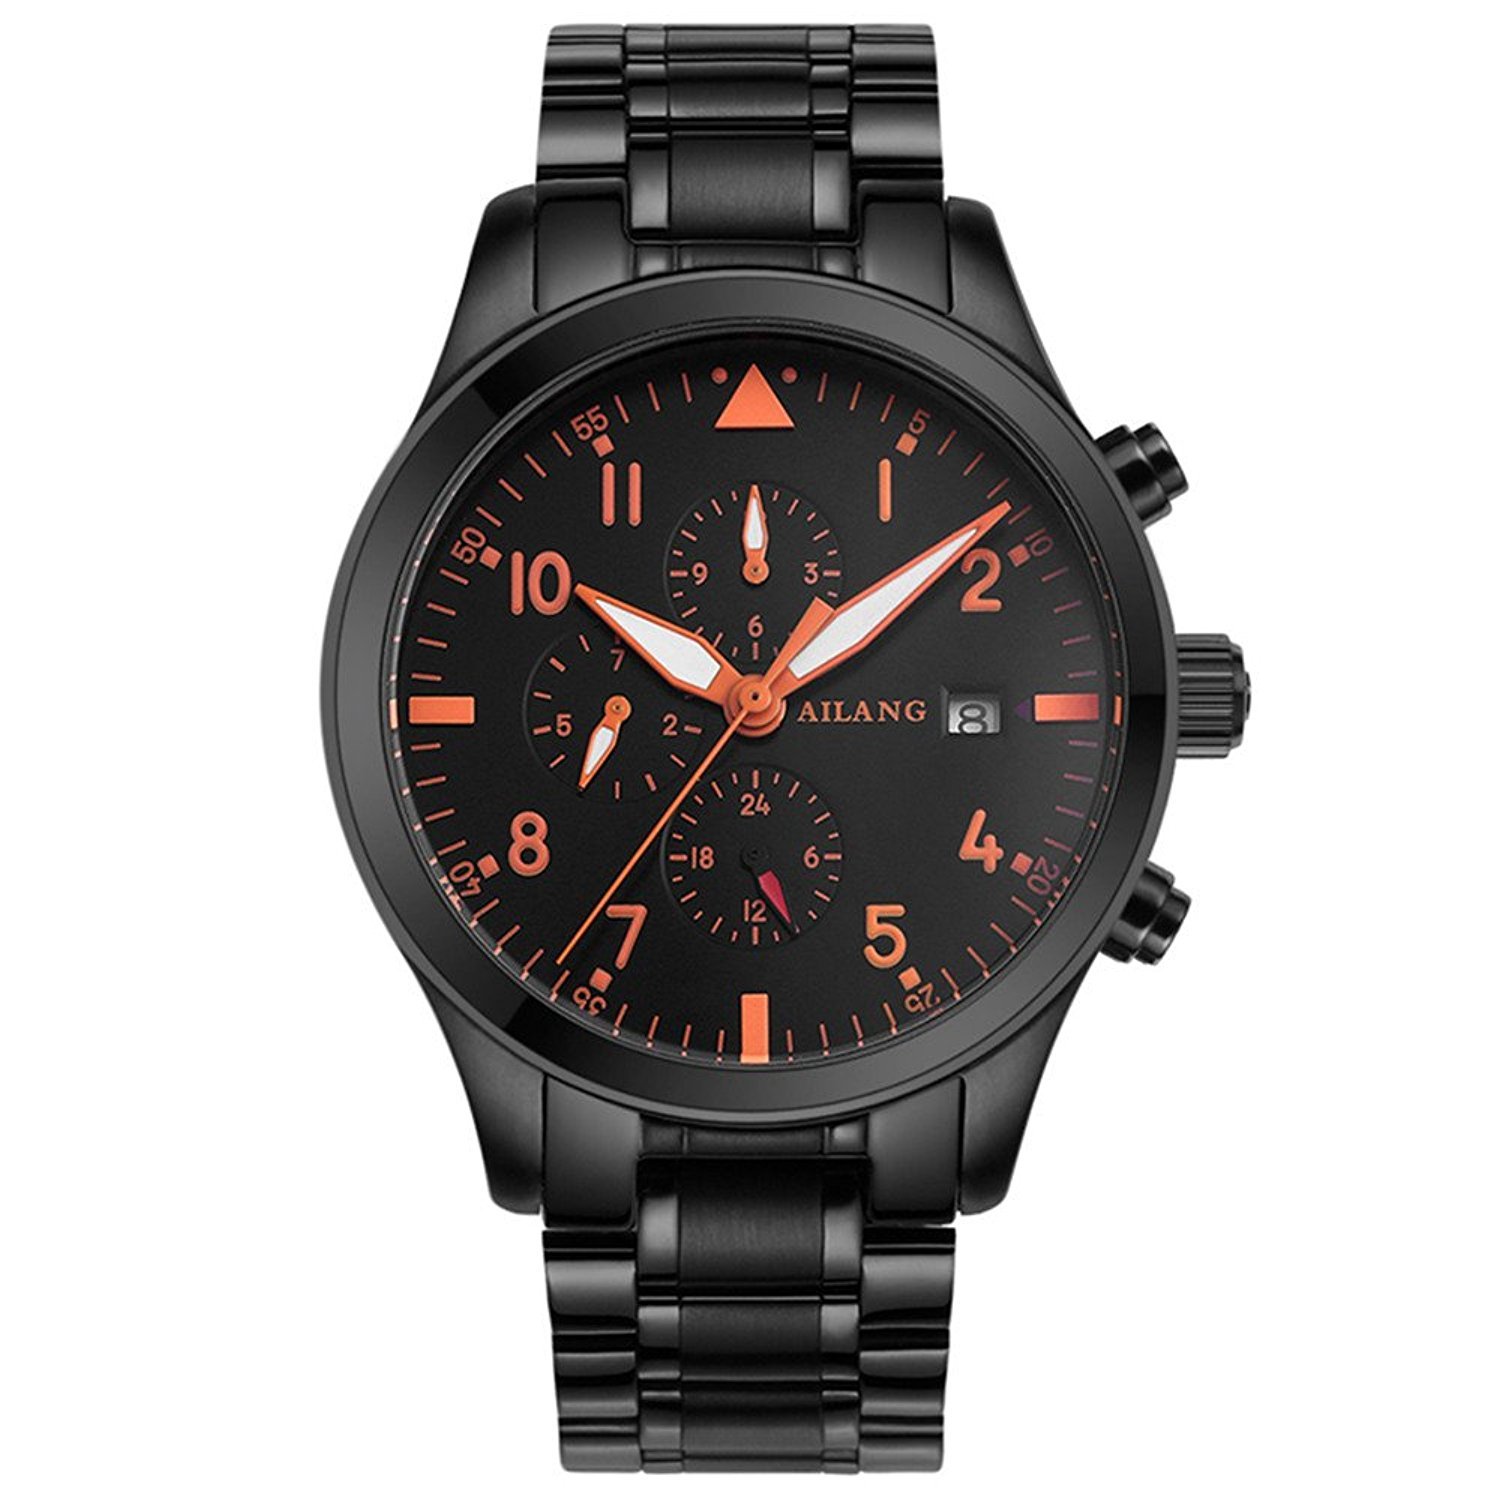 Ailang WhatsWatch Waterproof Sports Military Automatic Black Stainless Steel Strap Wrist Watch Mens with Day Date -309